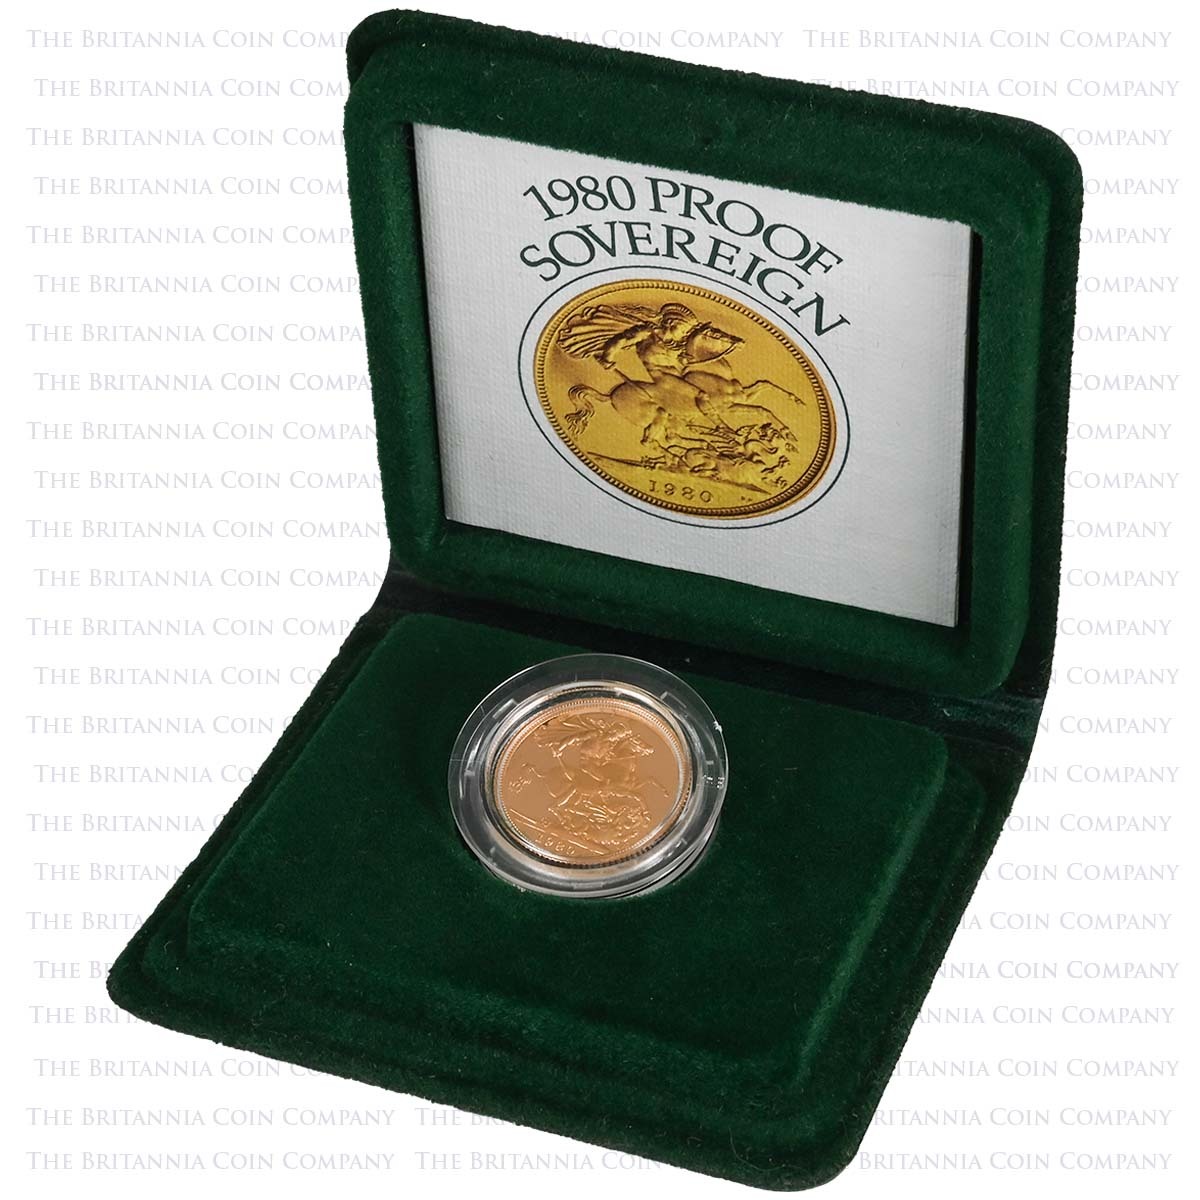 1980 Proof Gold Sovereign Boxed